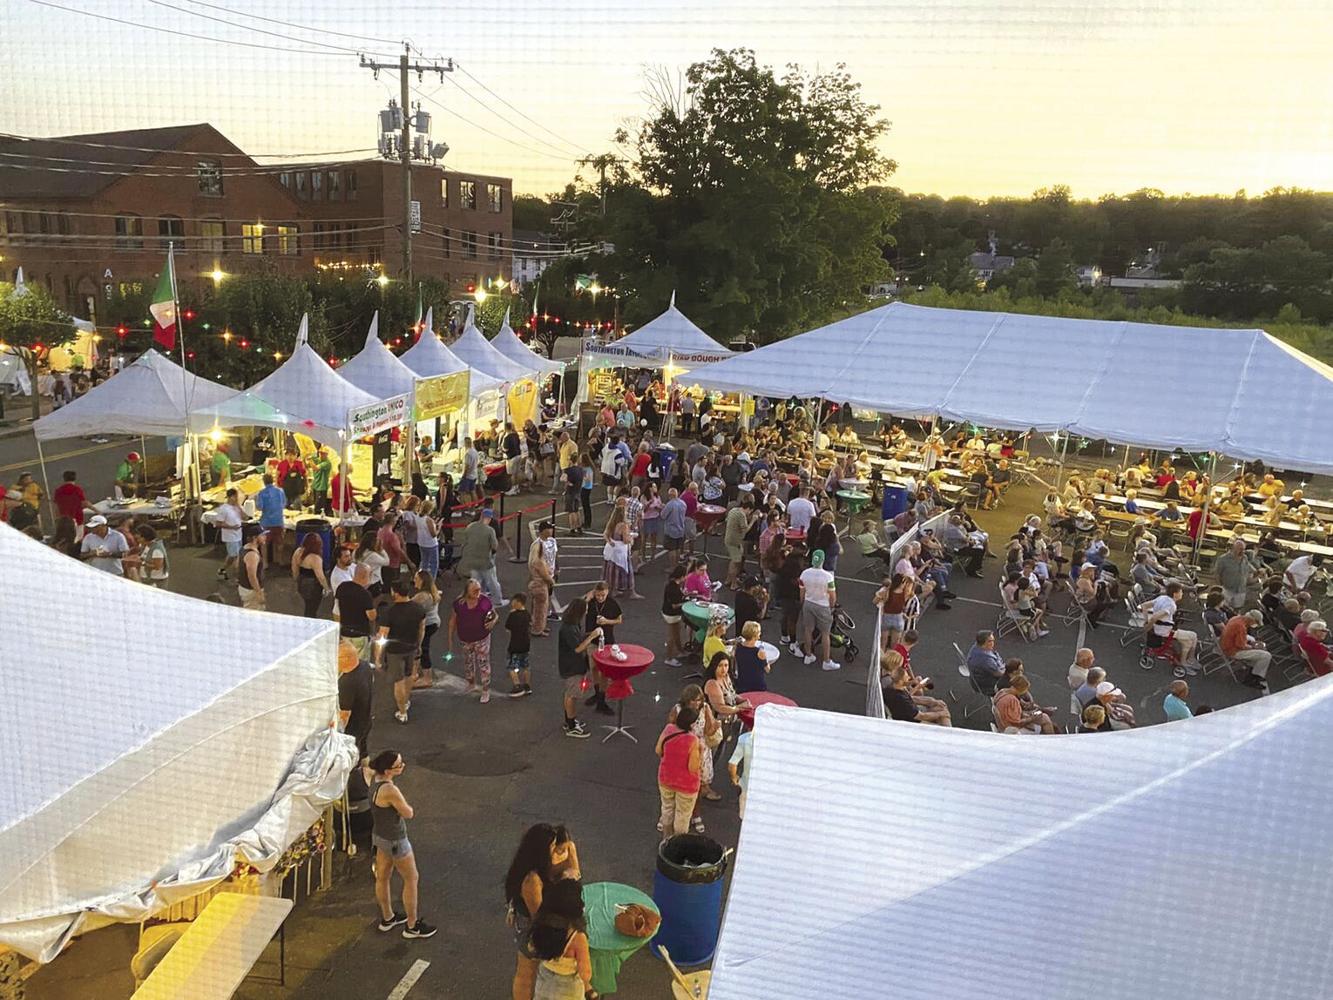 ItalianAmerican Festival in Southington is back, bigger and better